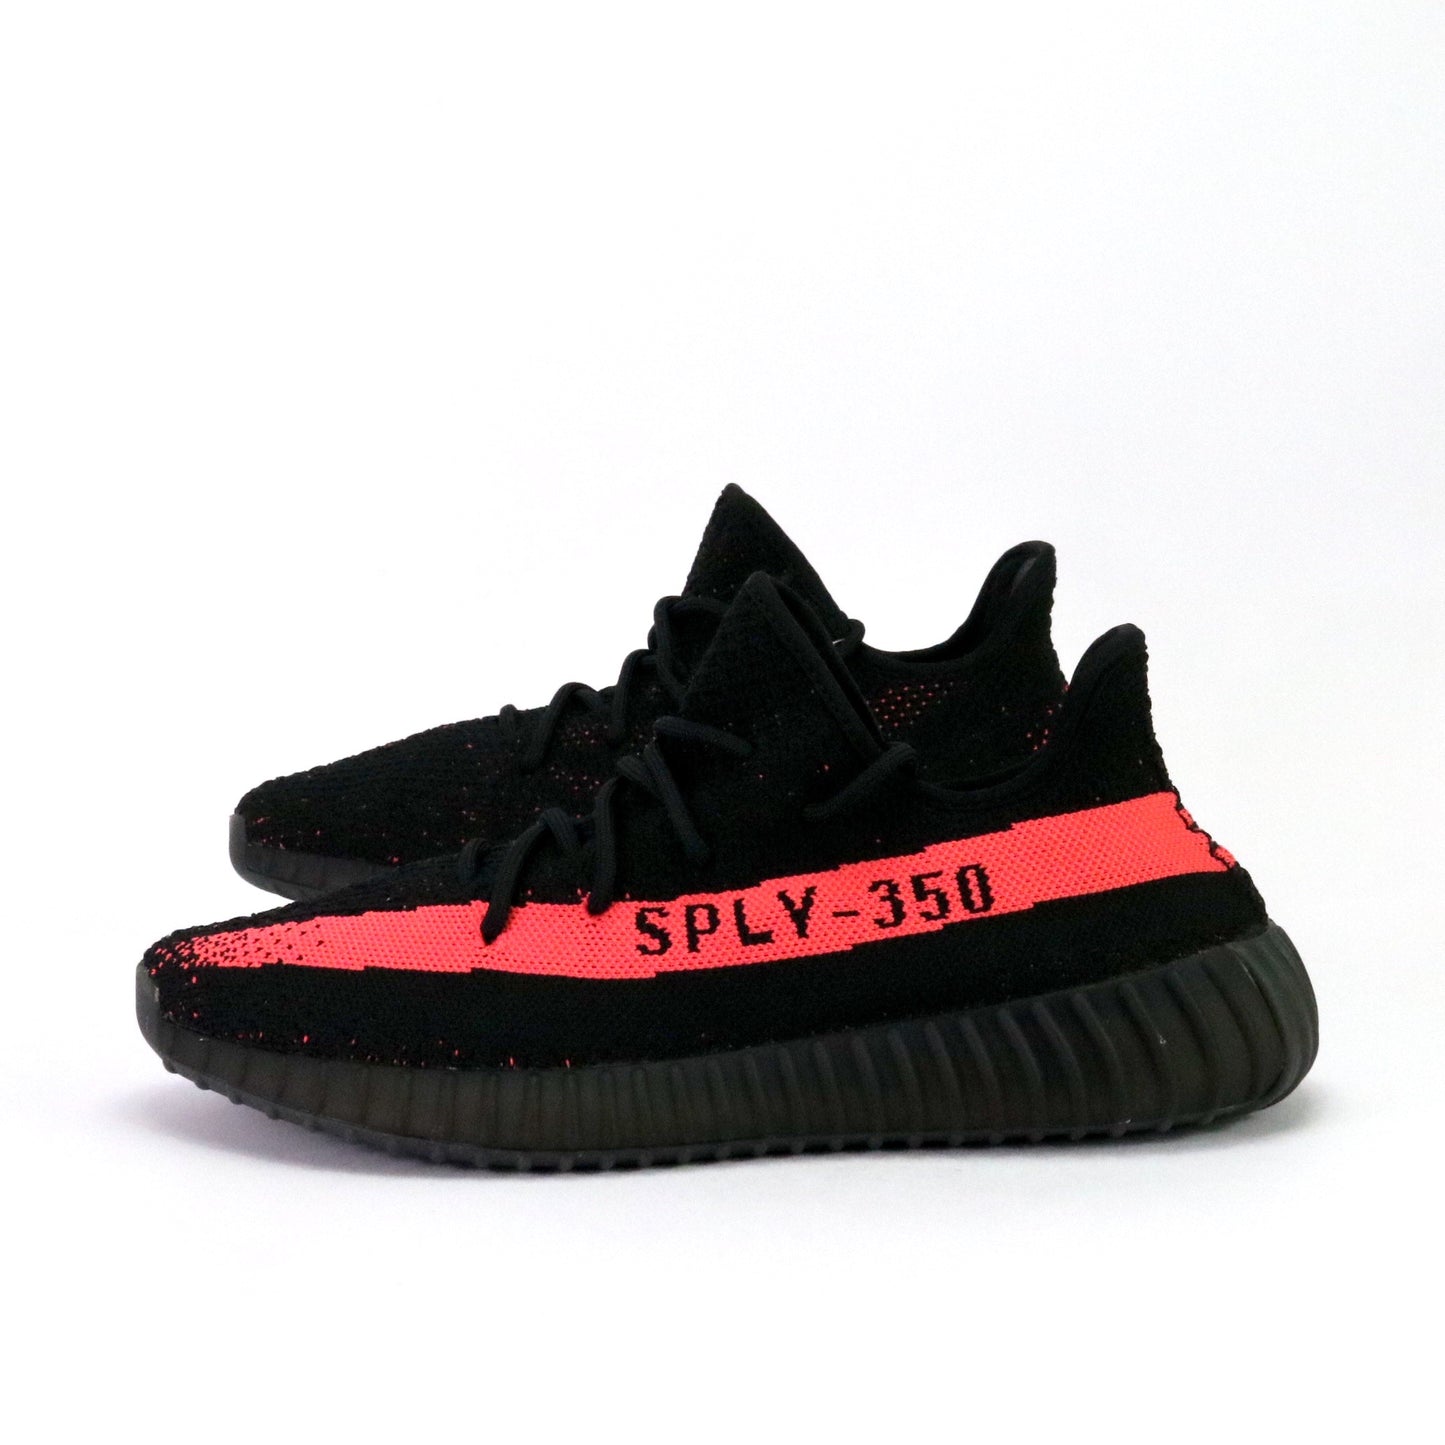 Adidas Yeezy Boost 350 V2 Core Black Red Pink Core Black